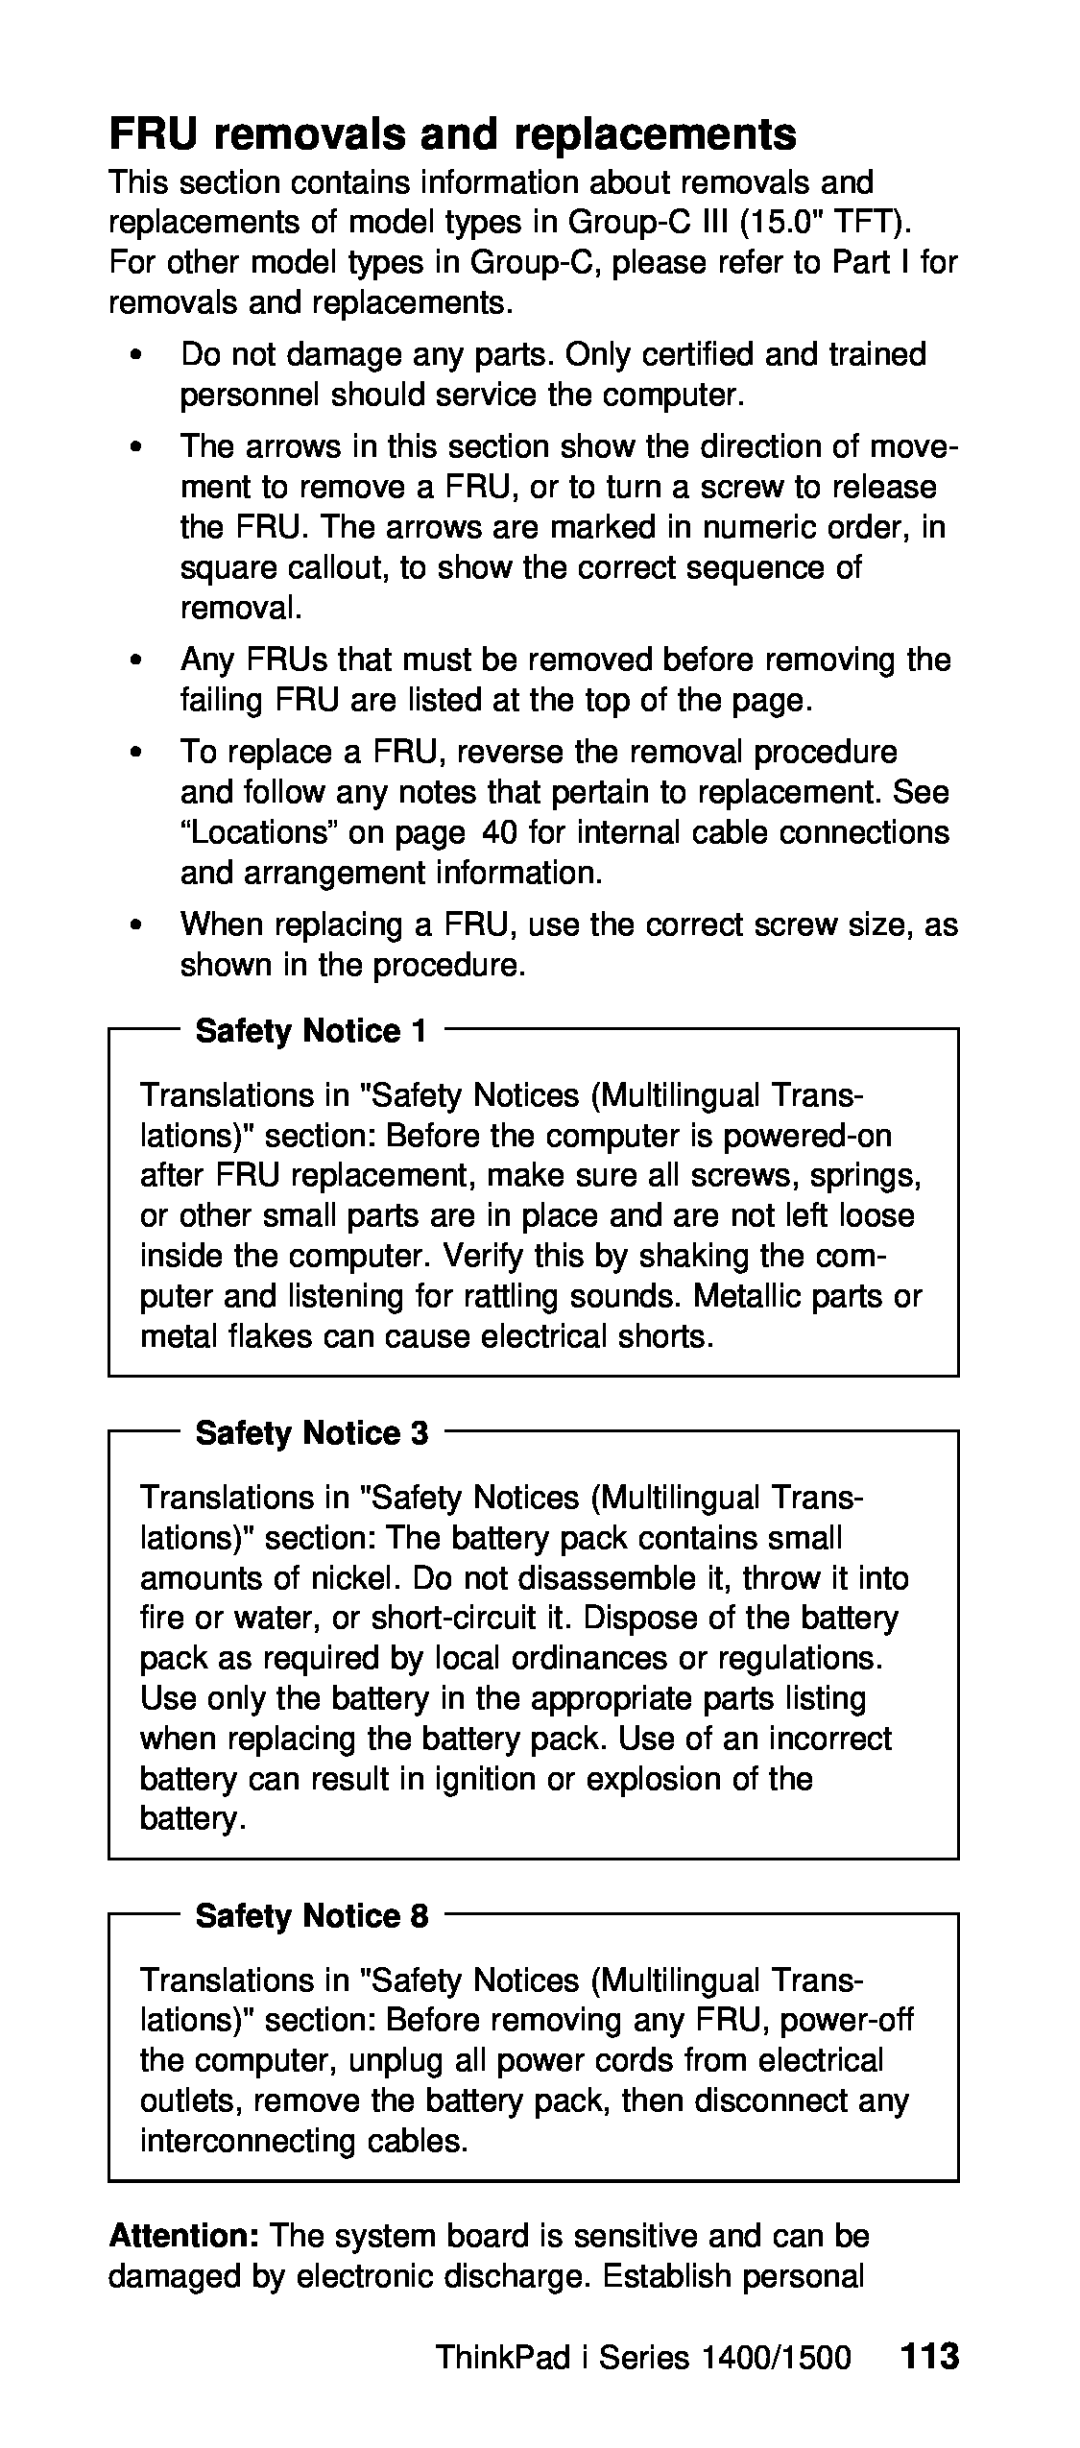 IBM Series 1400, Series 1500 manual FRU removals and replacements, Safety Notice 